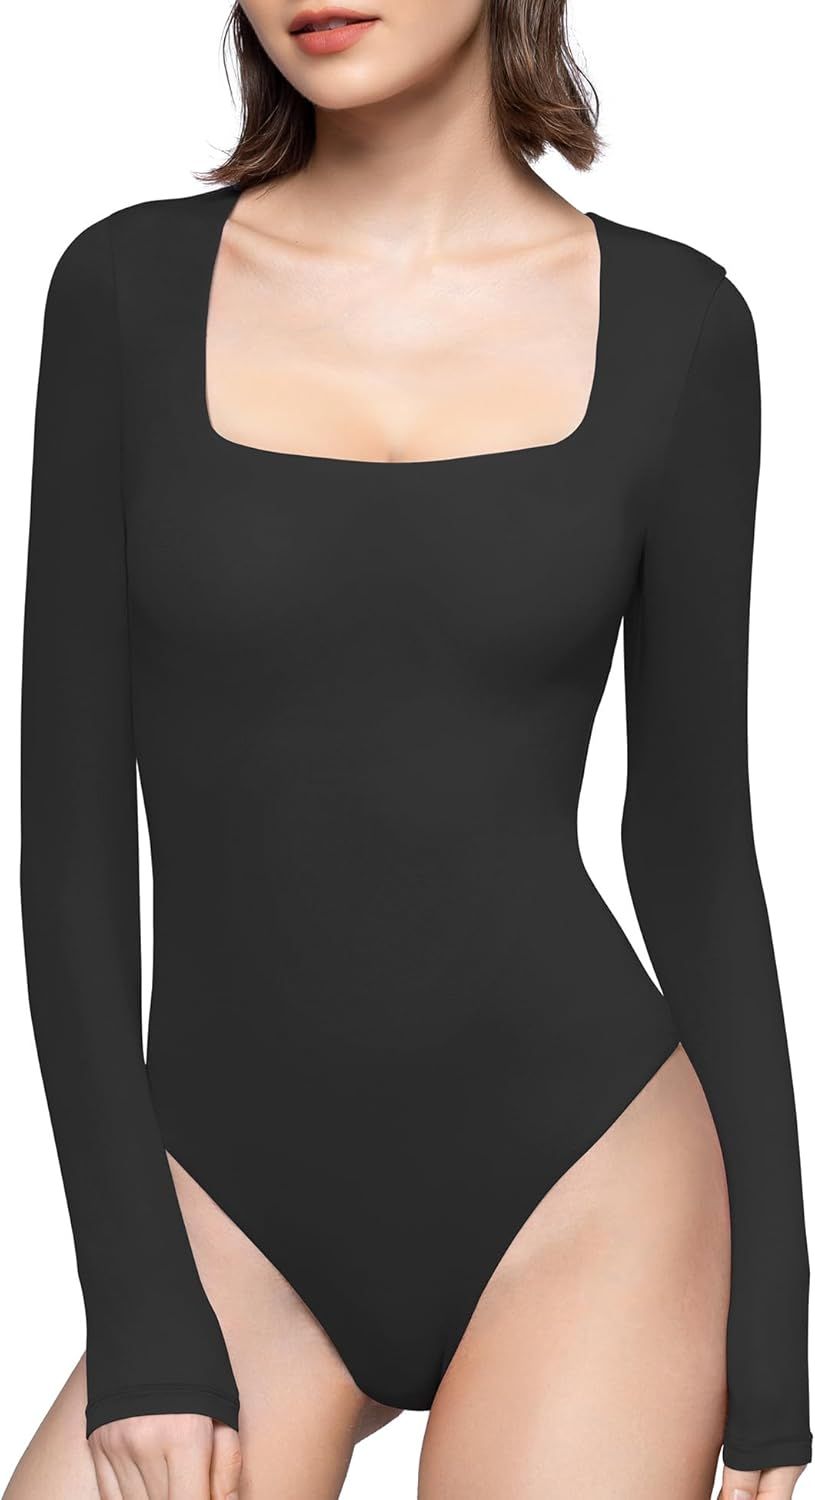 PUMIEY Women's Square Neck Long Sleeve Bodysuit Sexy Body Suit Tops Smoke Cloud Pro Collection | Amazon (US)